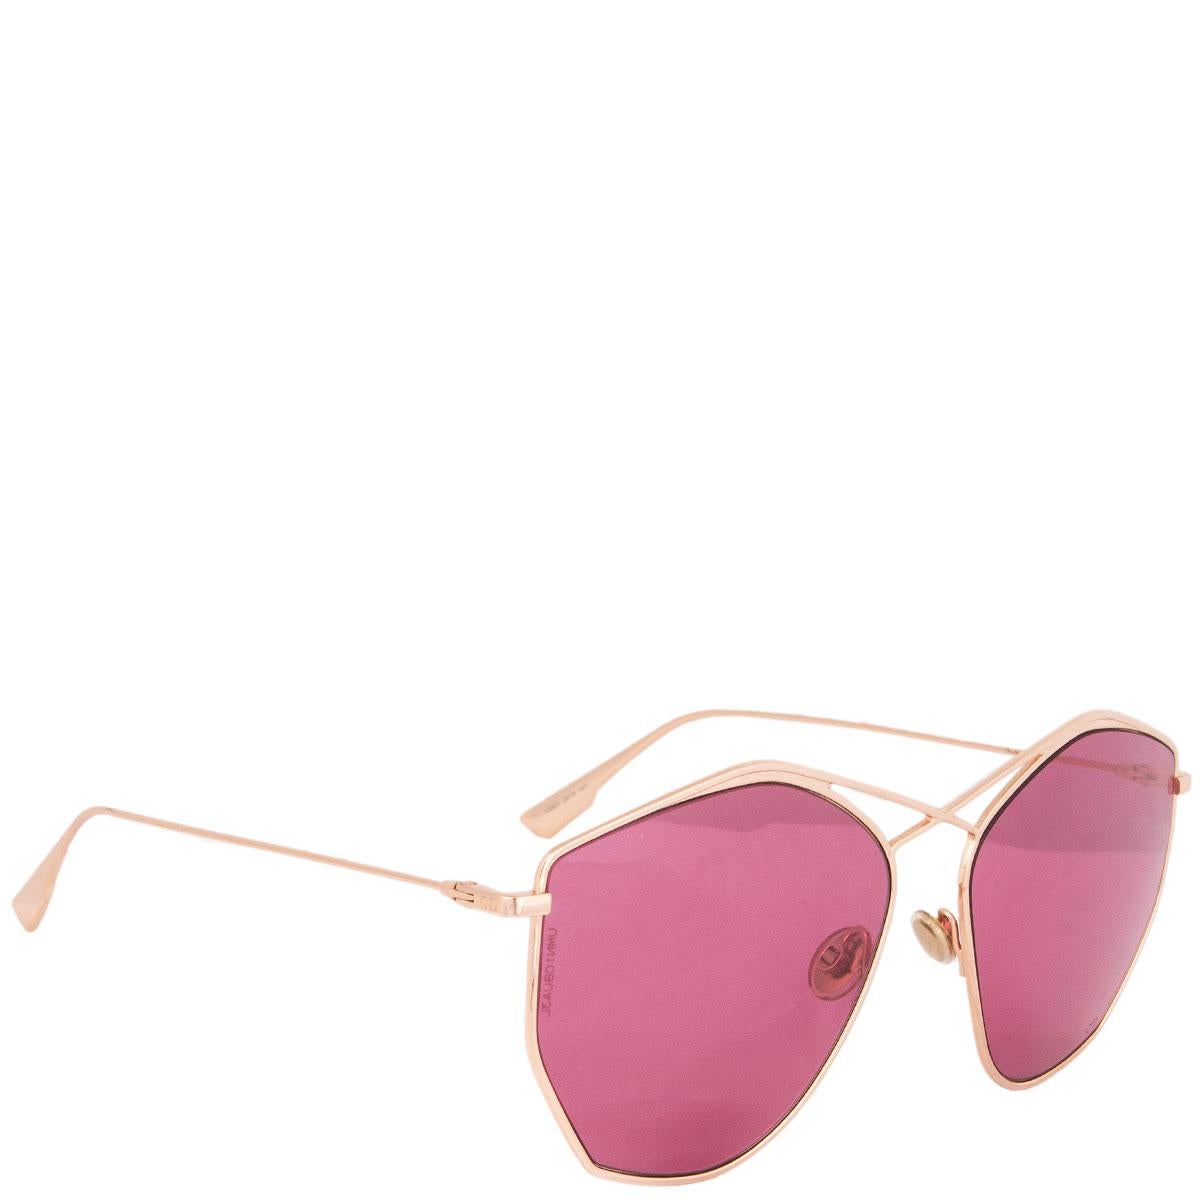 100% authentic Christian Dior 'Stellaire 4' sunglasses with rose gold metal frame and pink lenses. Have been worn and are in excellent condition. Come with case.

Model	DDBU1 59-16 145
Width	13.5cm (5.3in)
Height	5.5cm (2.1in)

All our listings